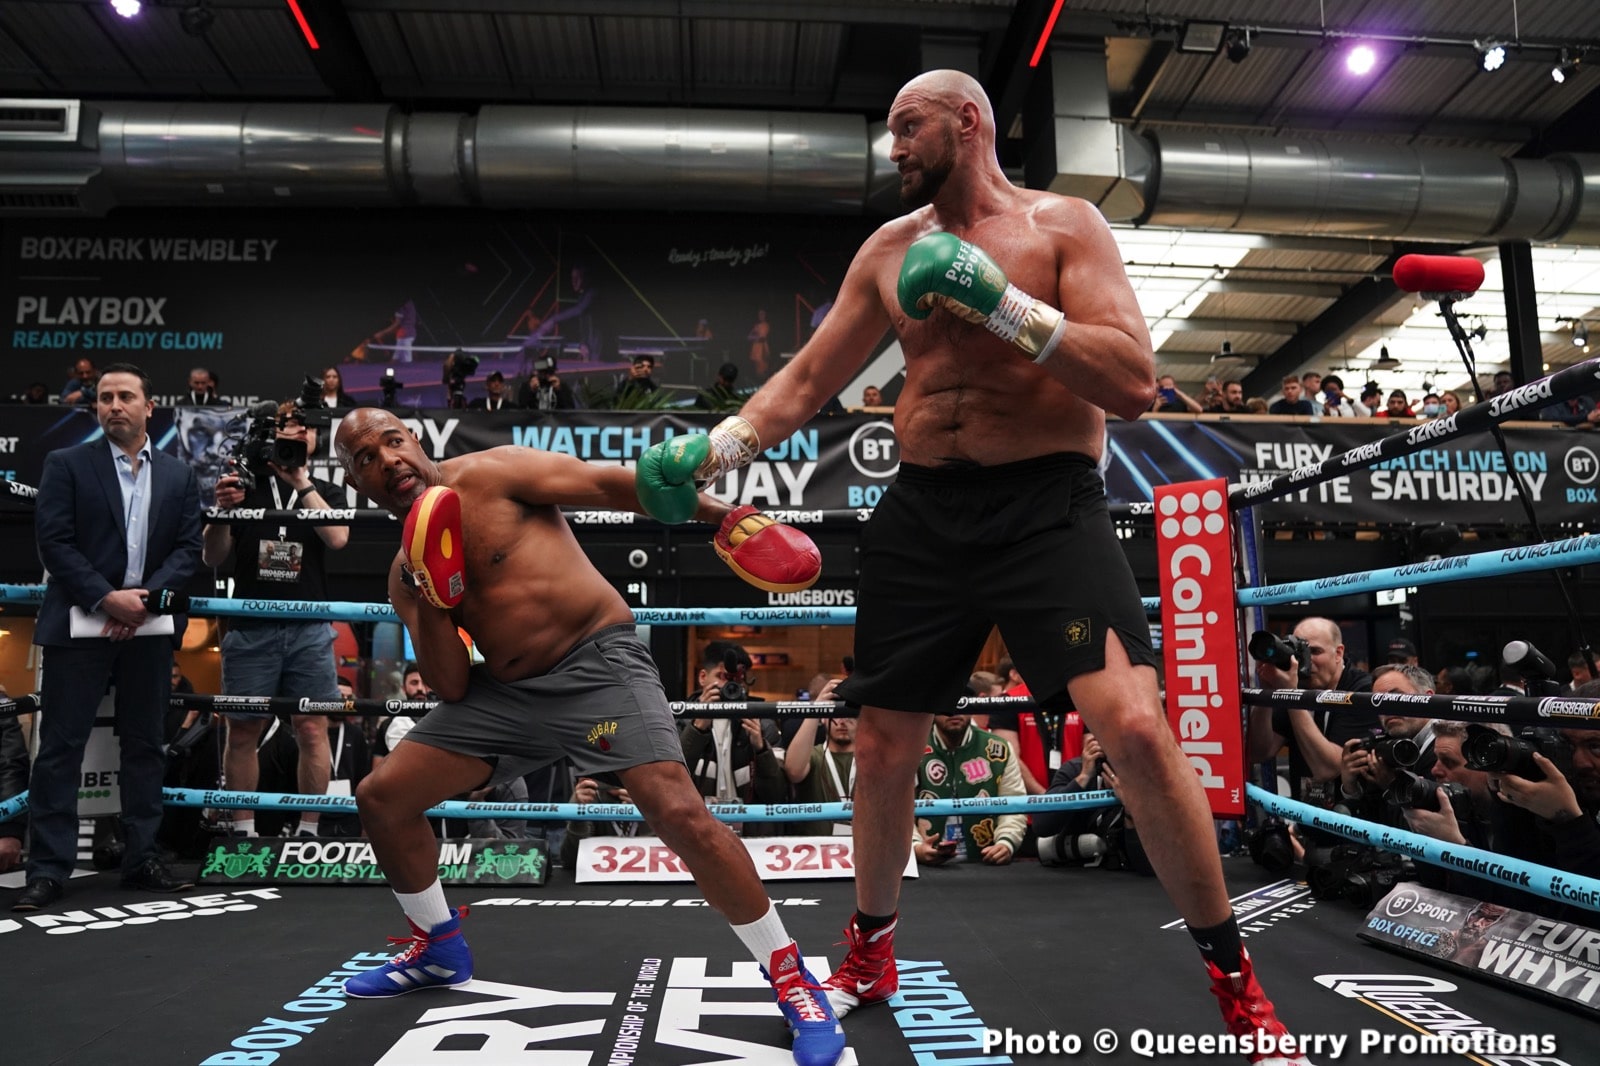 Image: Joshua declines Fury's offer to train him: "I wouldn't take his help"